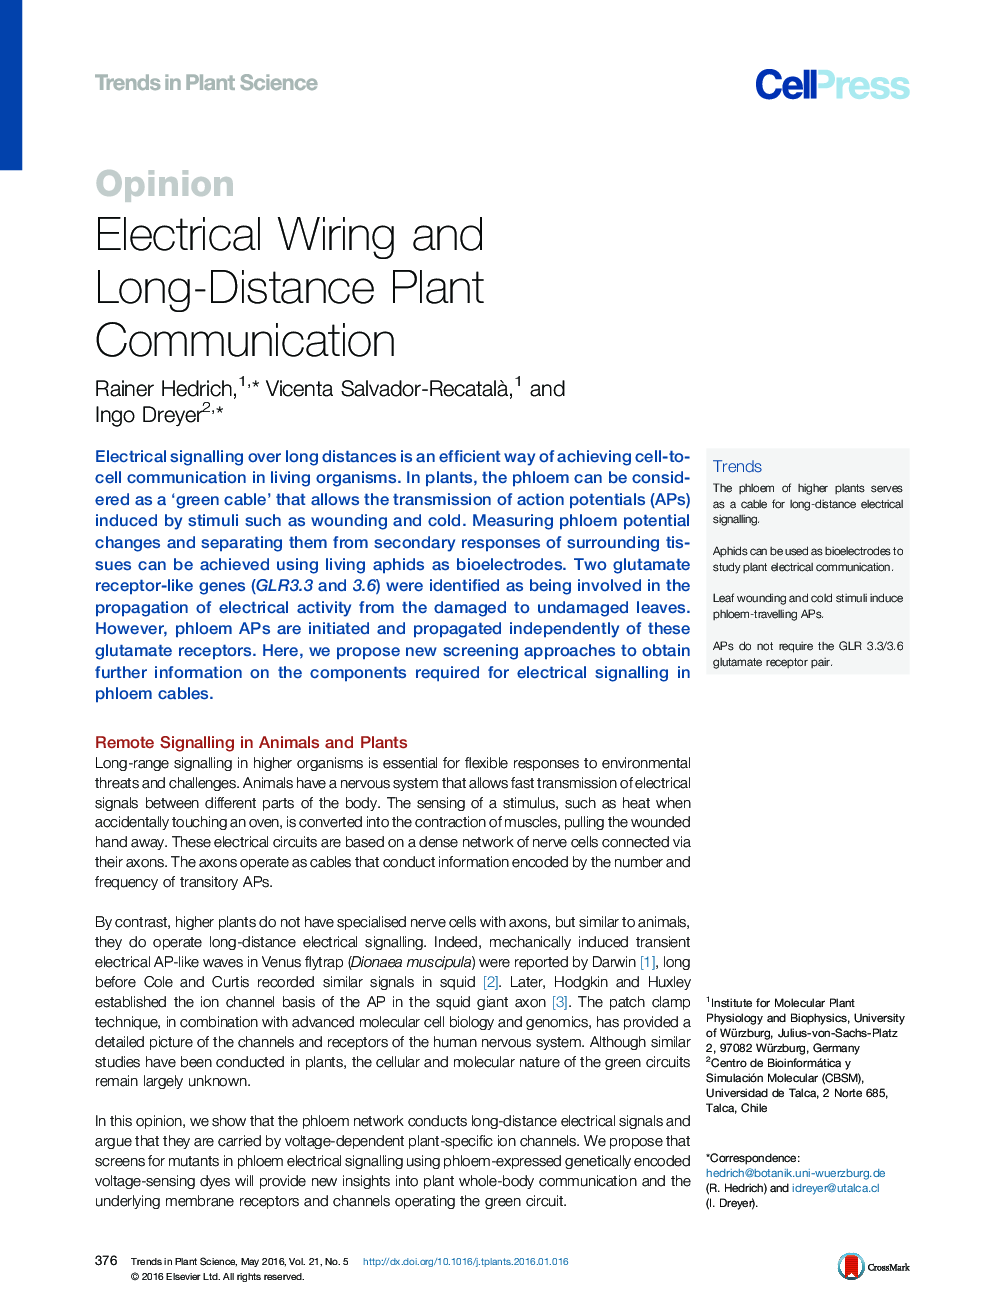 Electrical Wiring and Long-Distance Plant Communication